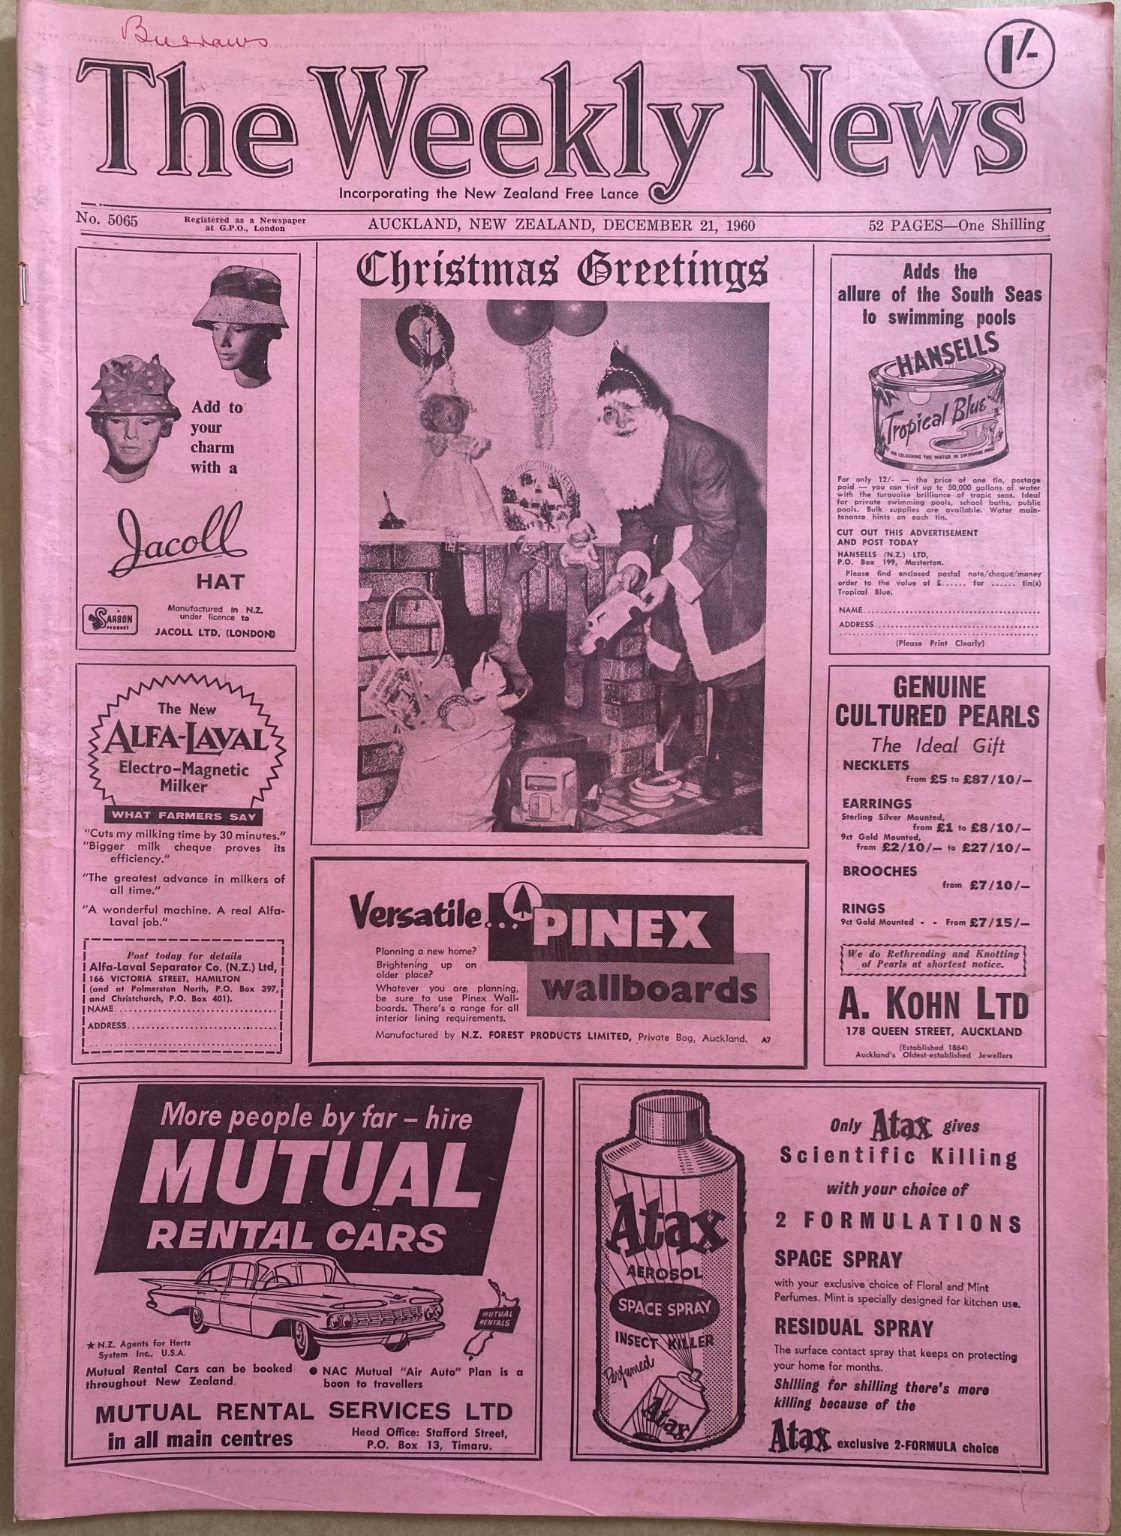 OLD NEWSPAPER: The Weekly News, No. 5065, 21 December 1960